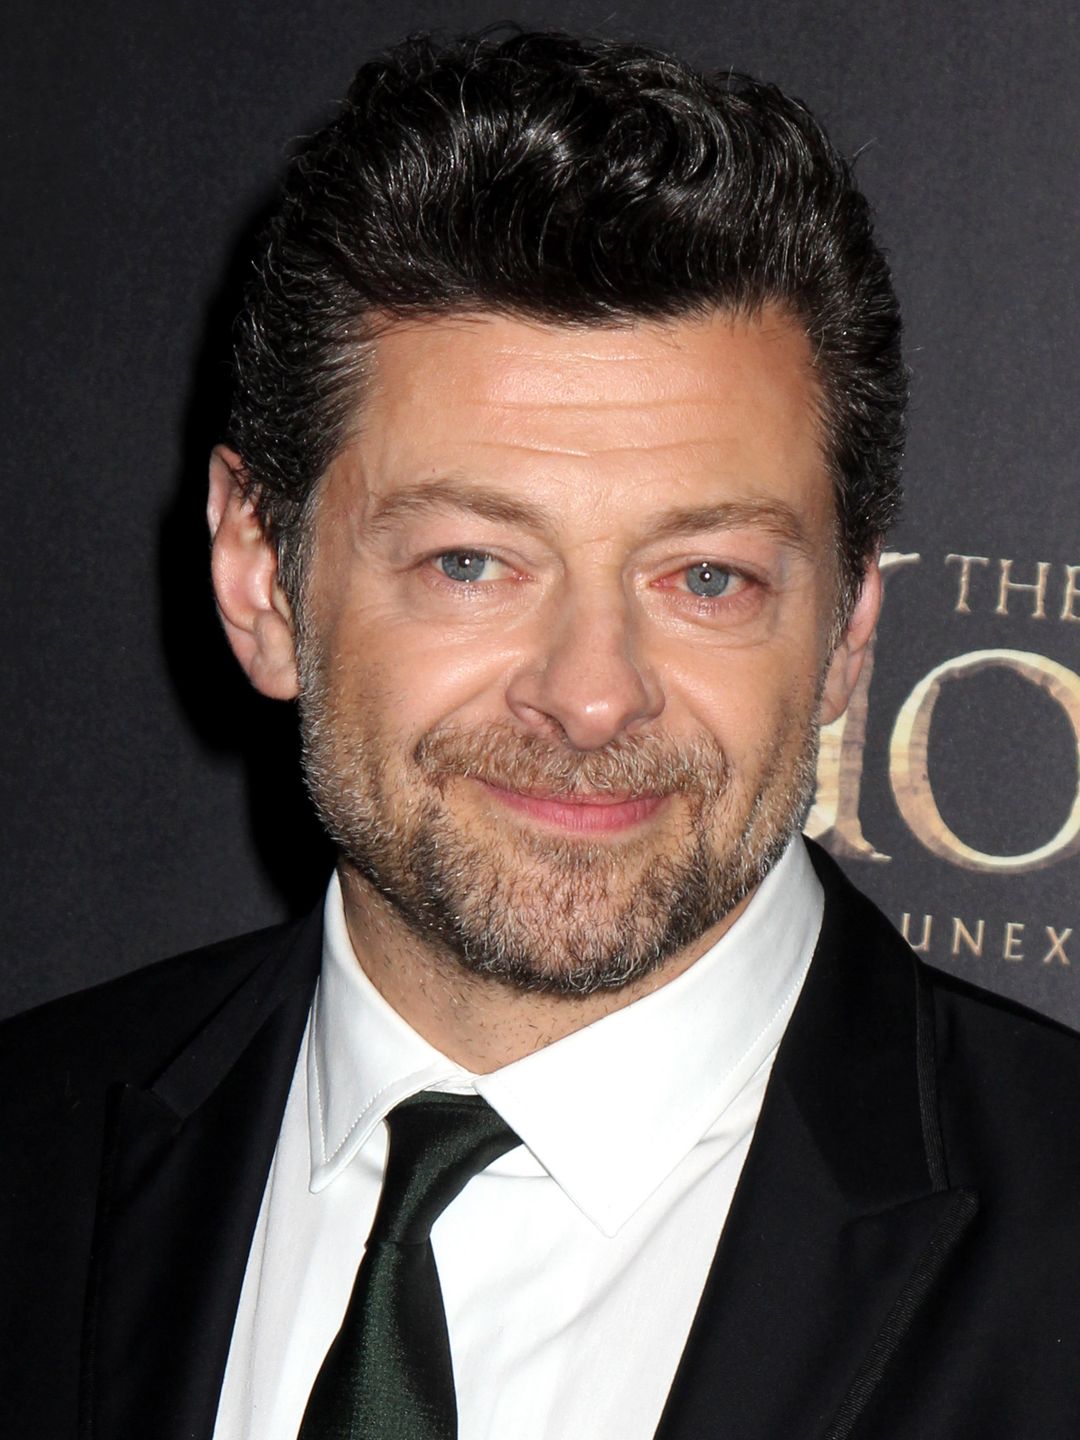 Andy Serkis early childhood